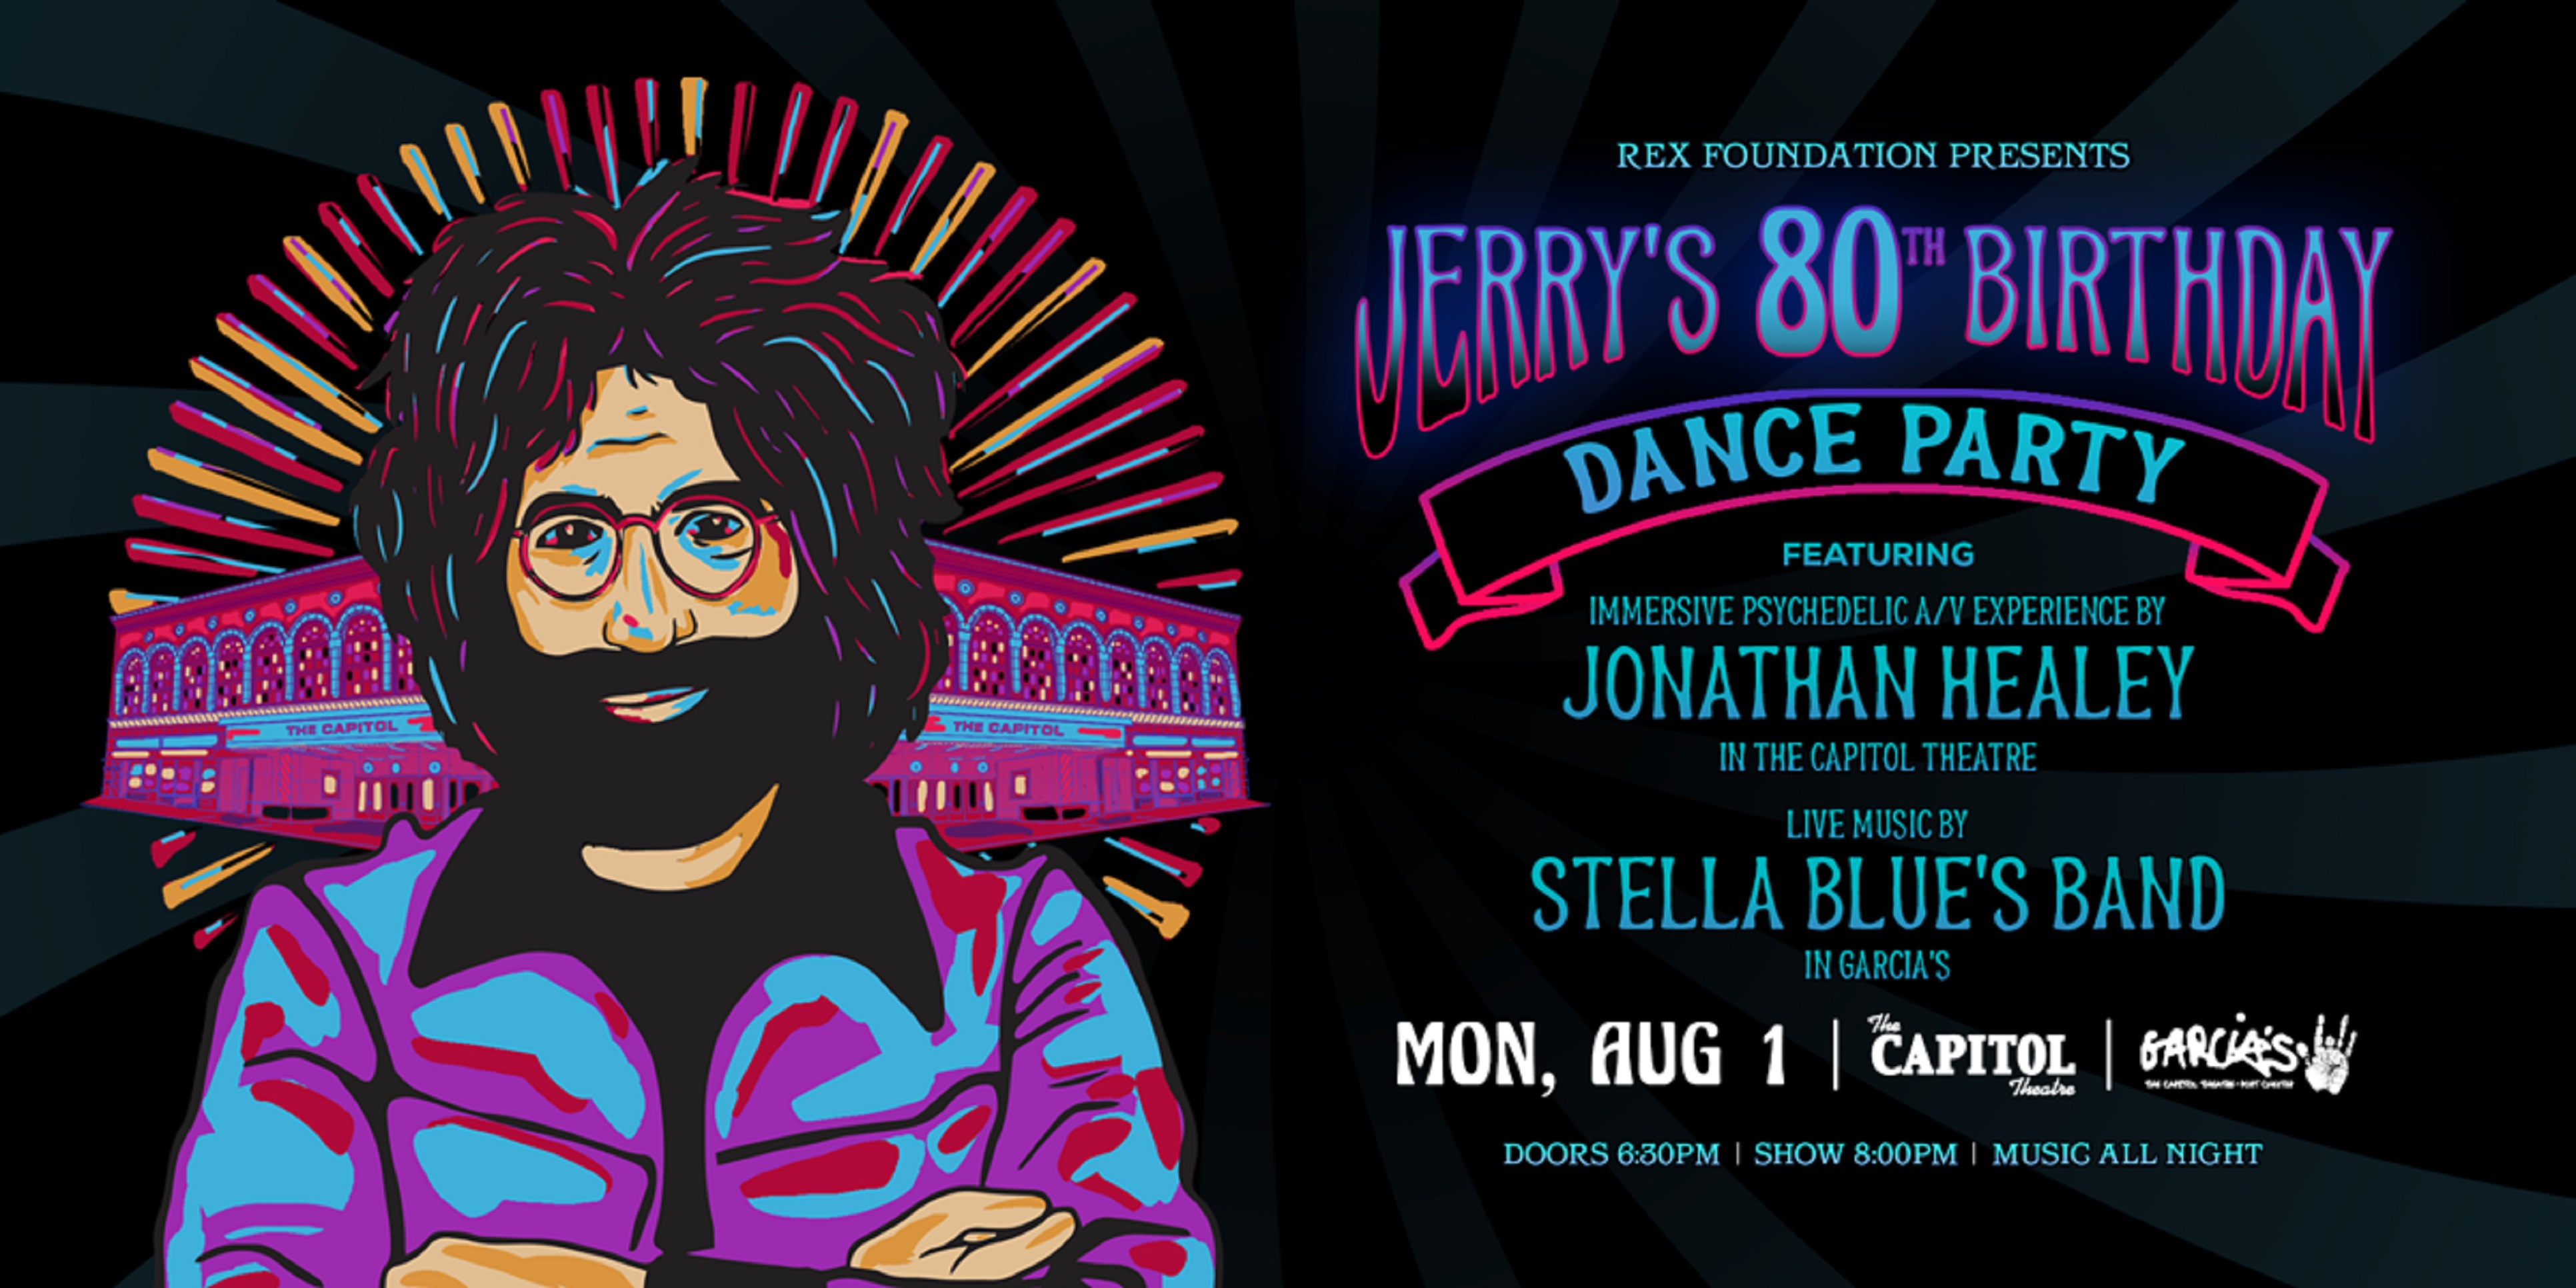 Jerry's 80th Birthday Dance Party at the Capitol Theatre